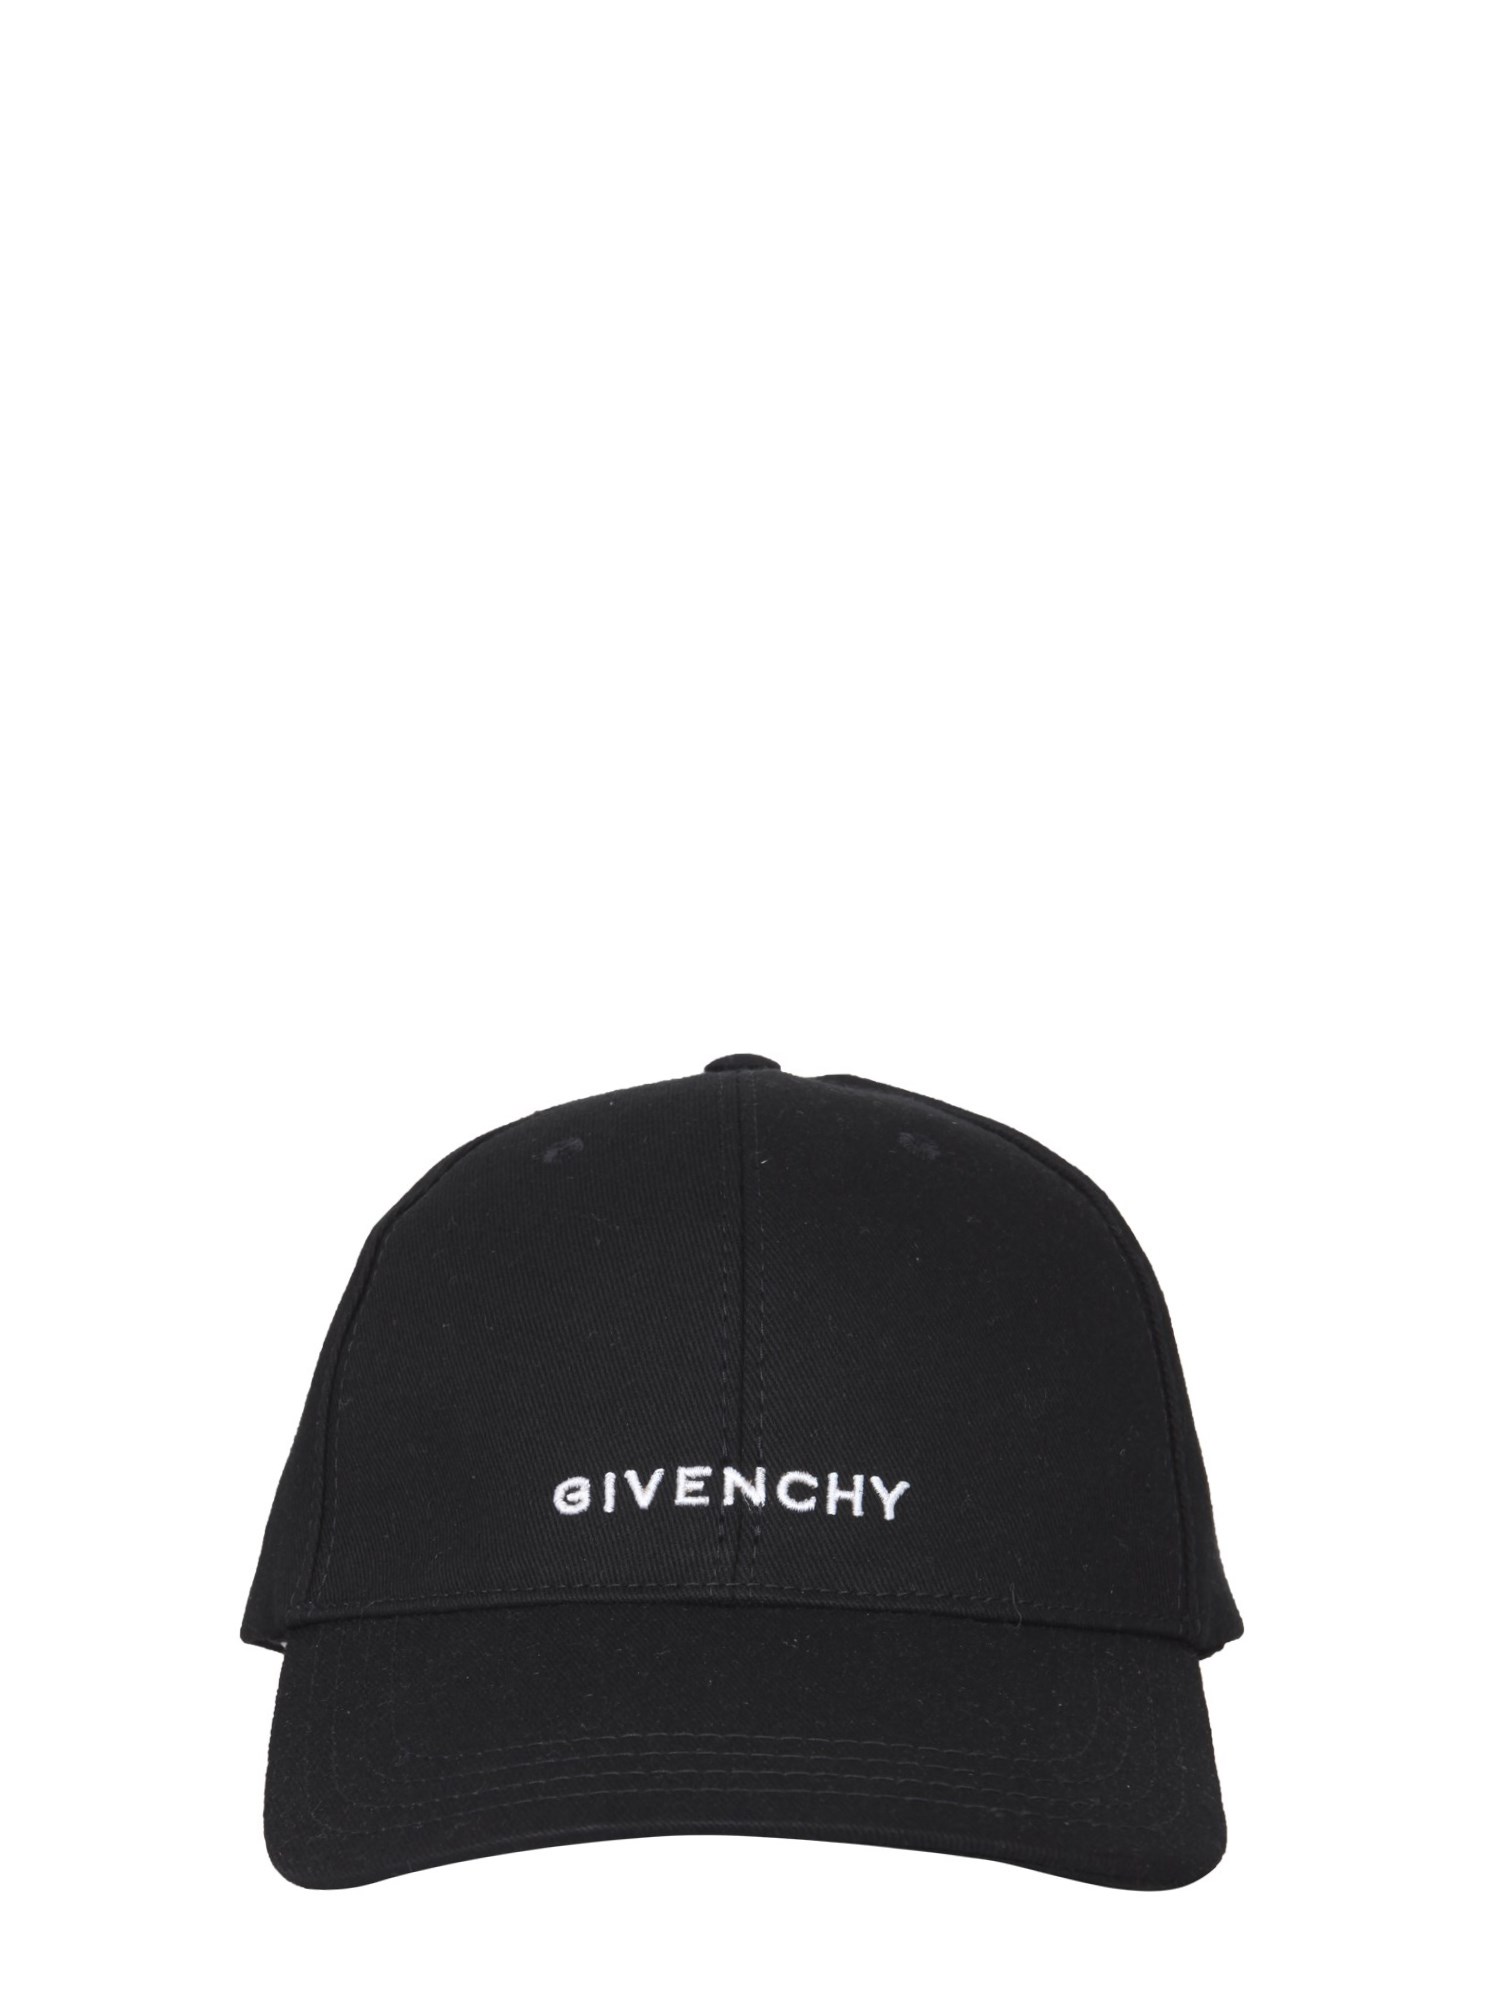 Givenchy givenchy hat 4g